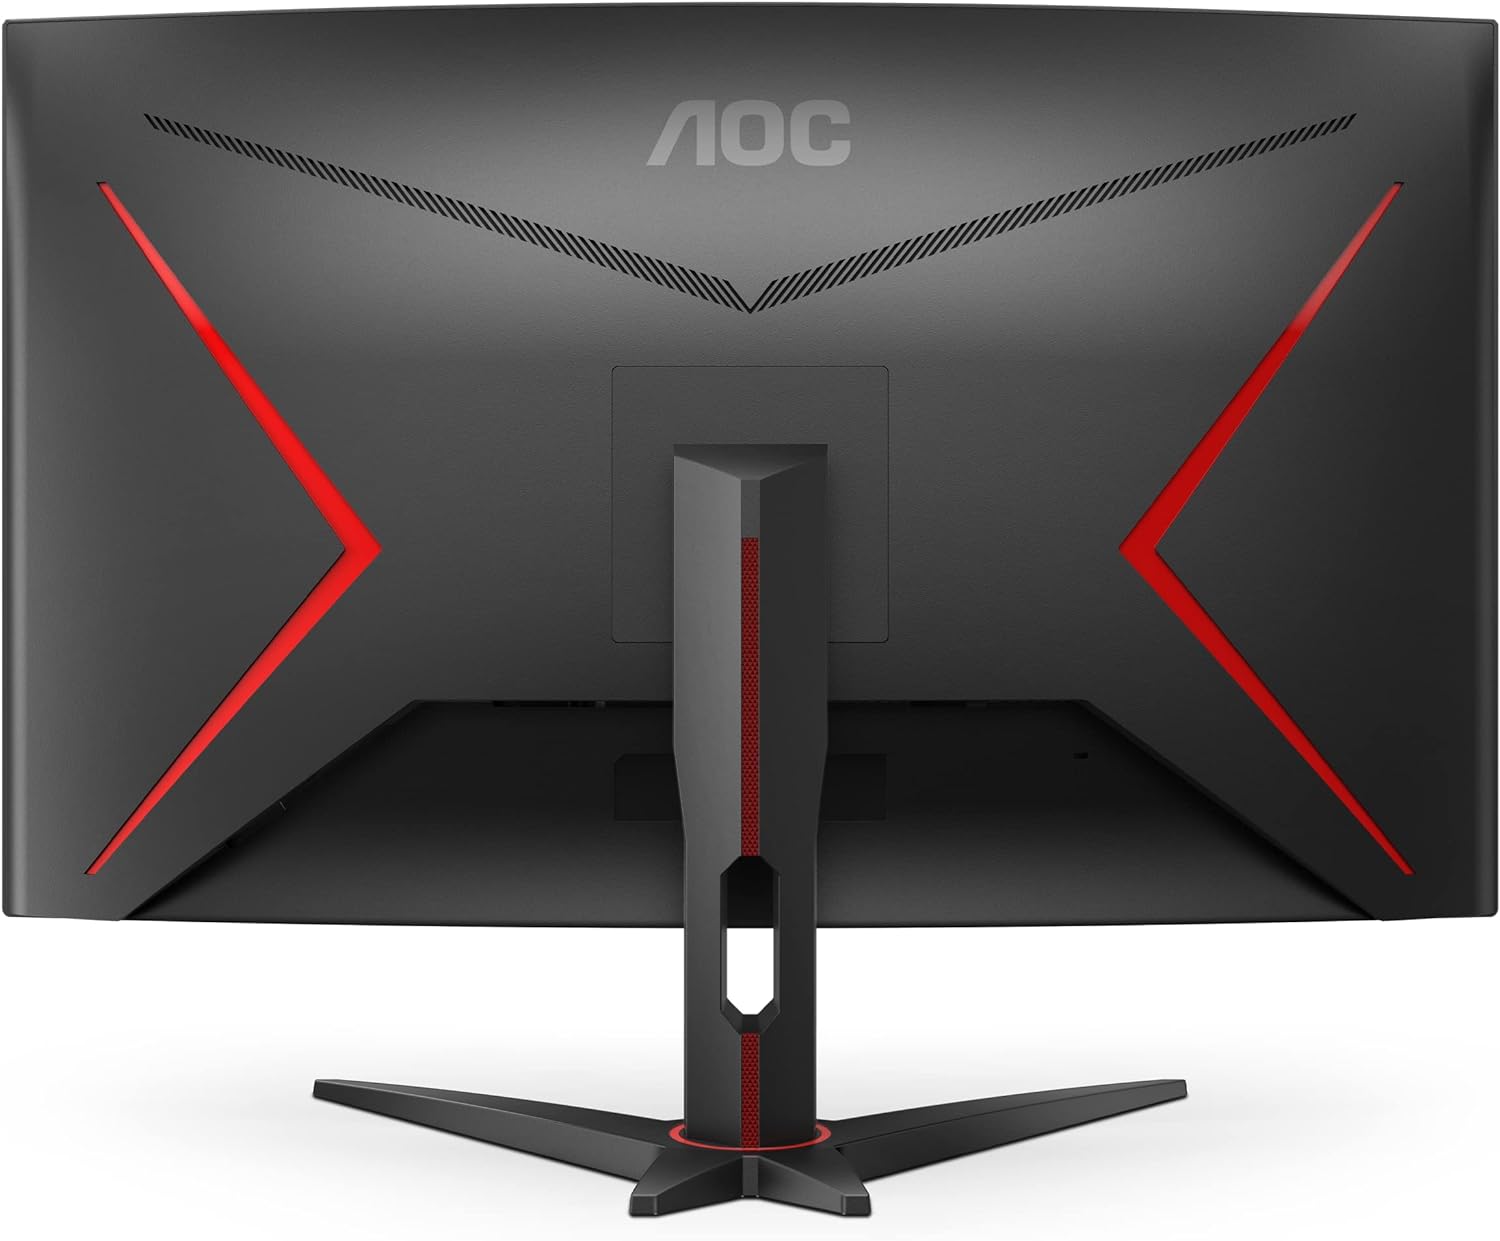 AMD FreeSync Premium for Smooth Gameplay - 48-240Hz Variable Refresh Rate - Competitive Edge 0685417724185